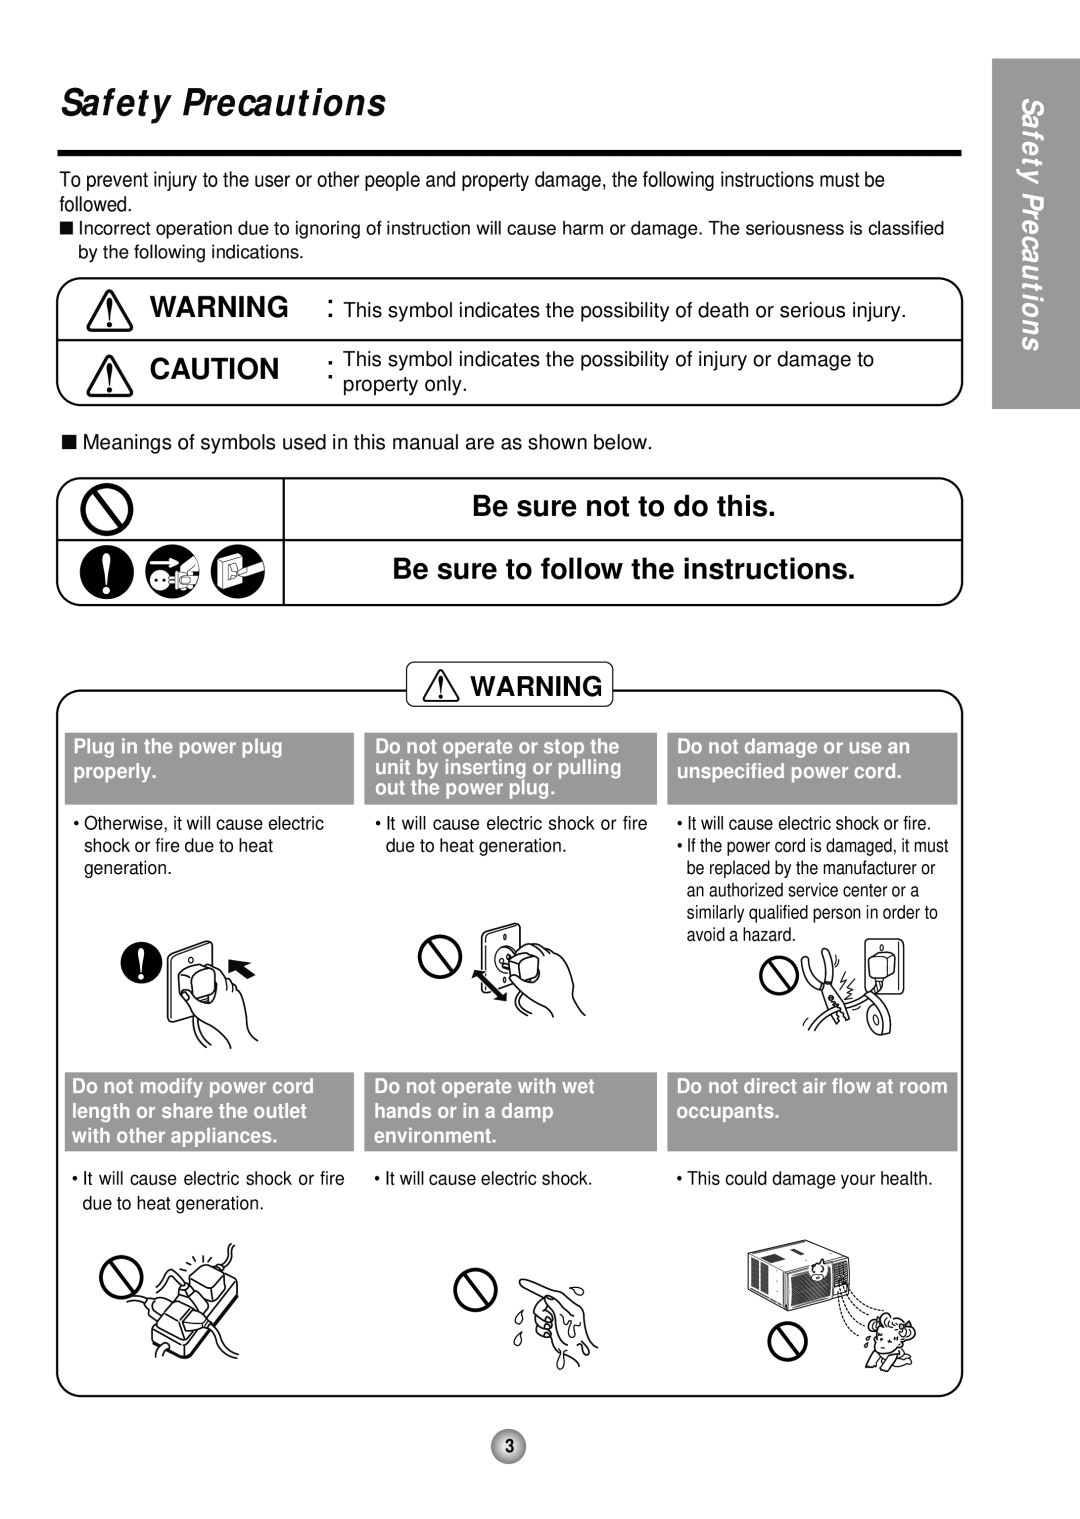 Panasonic CW-XC244HU Safety Precautions, Be sure not to do this, Be sure to follow the instructions, hands or in a damp 